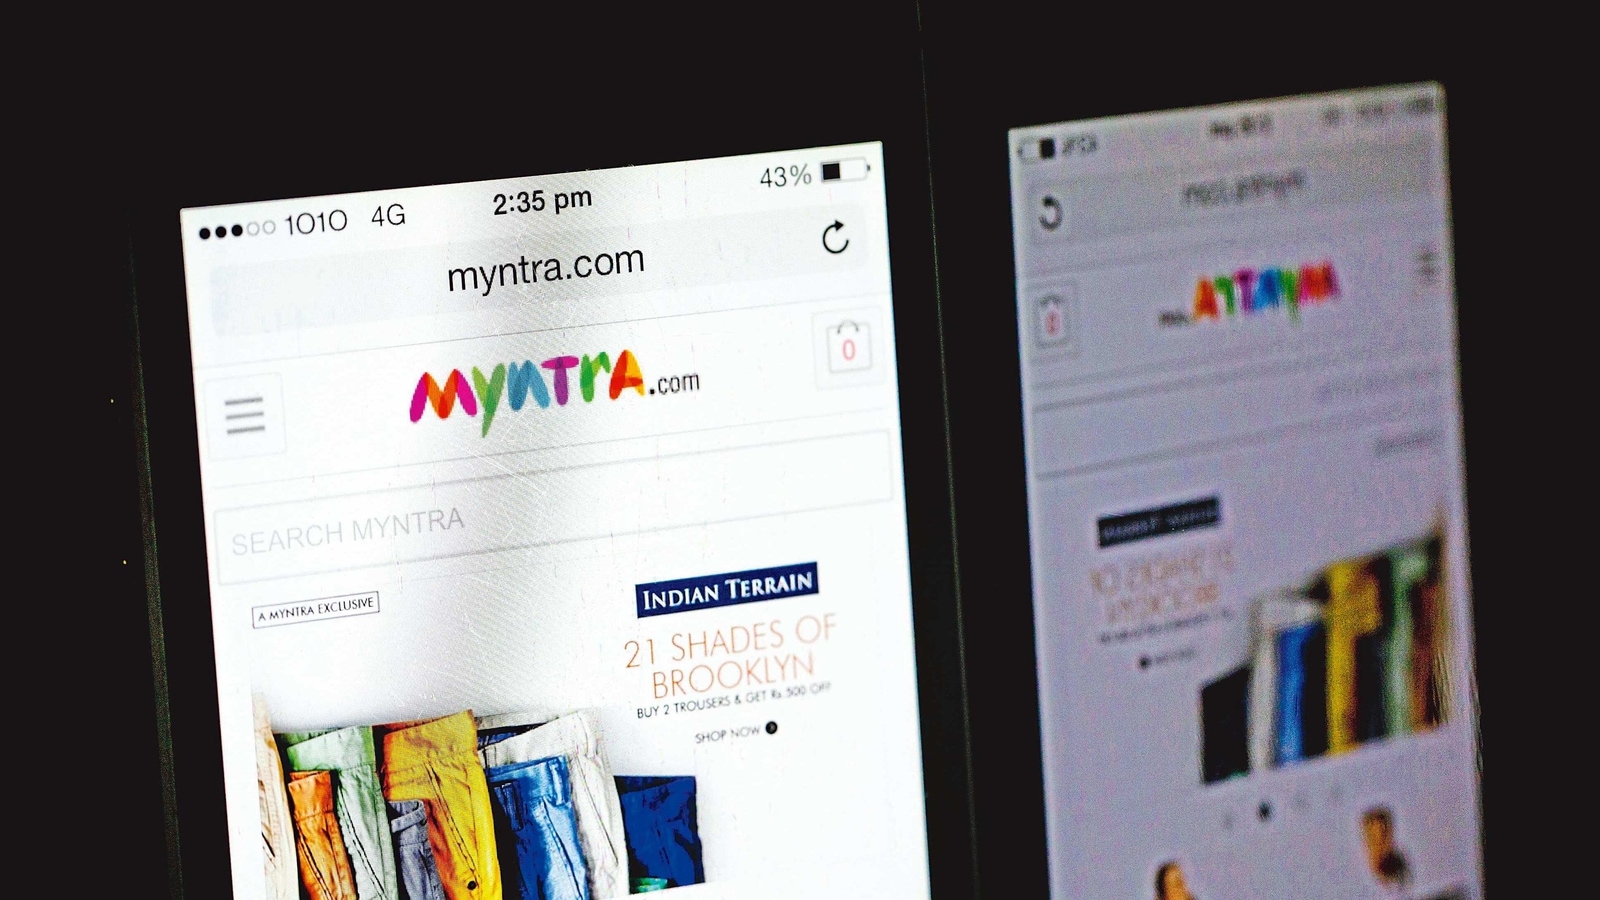 16 3D Names for myntra